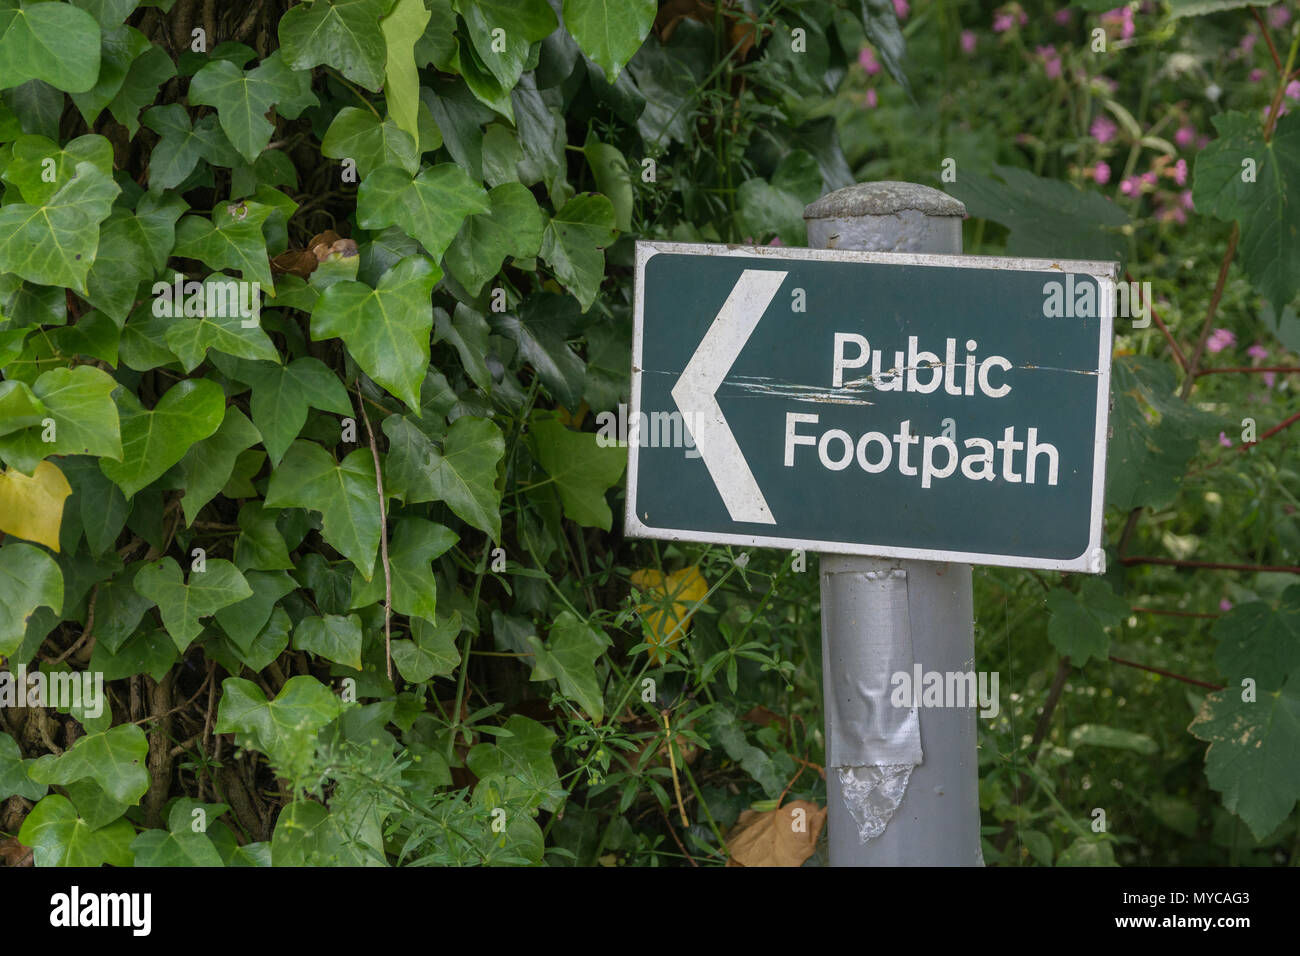 Public footpath sign near Truro, Cornwall. Stay on the right path, on the right path metaphor, walking signpost UK, public footpath signpost UK. Stock Photo